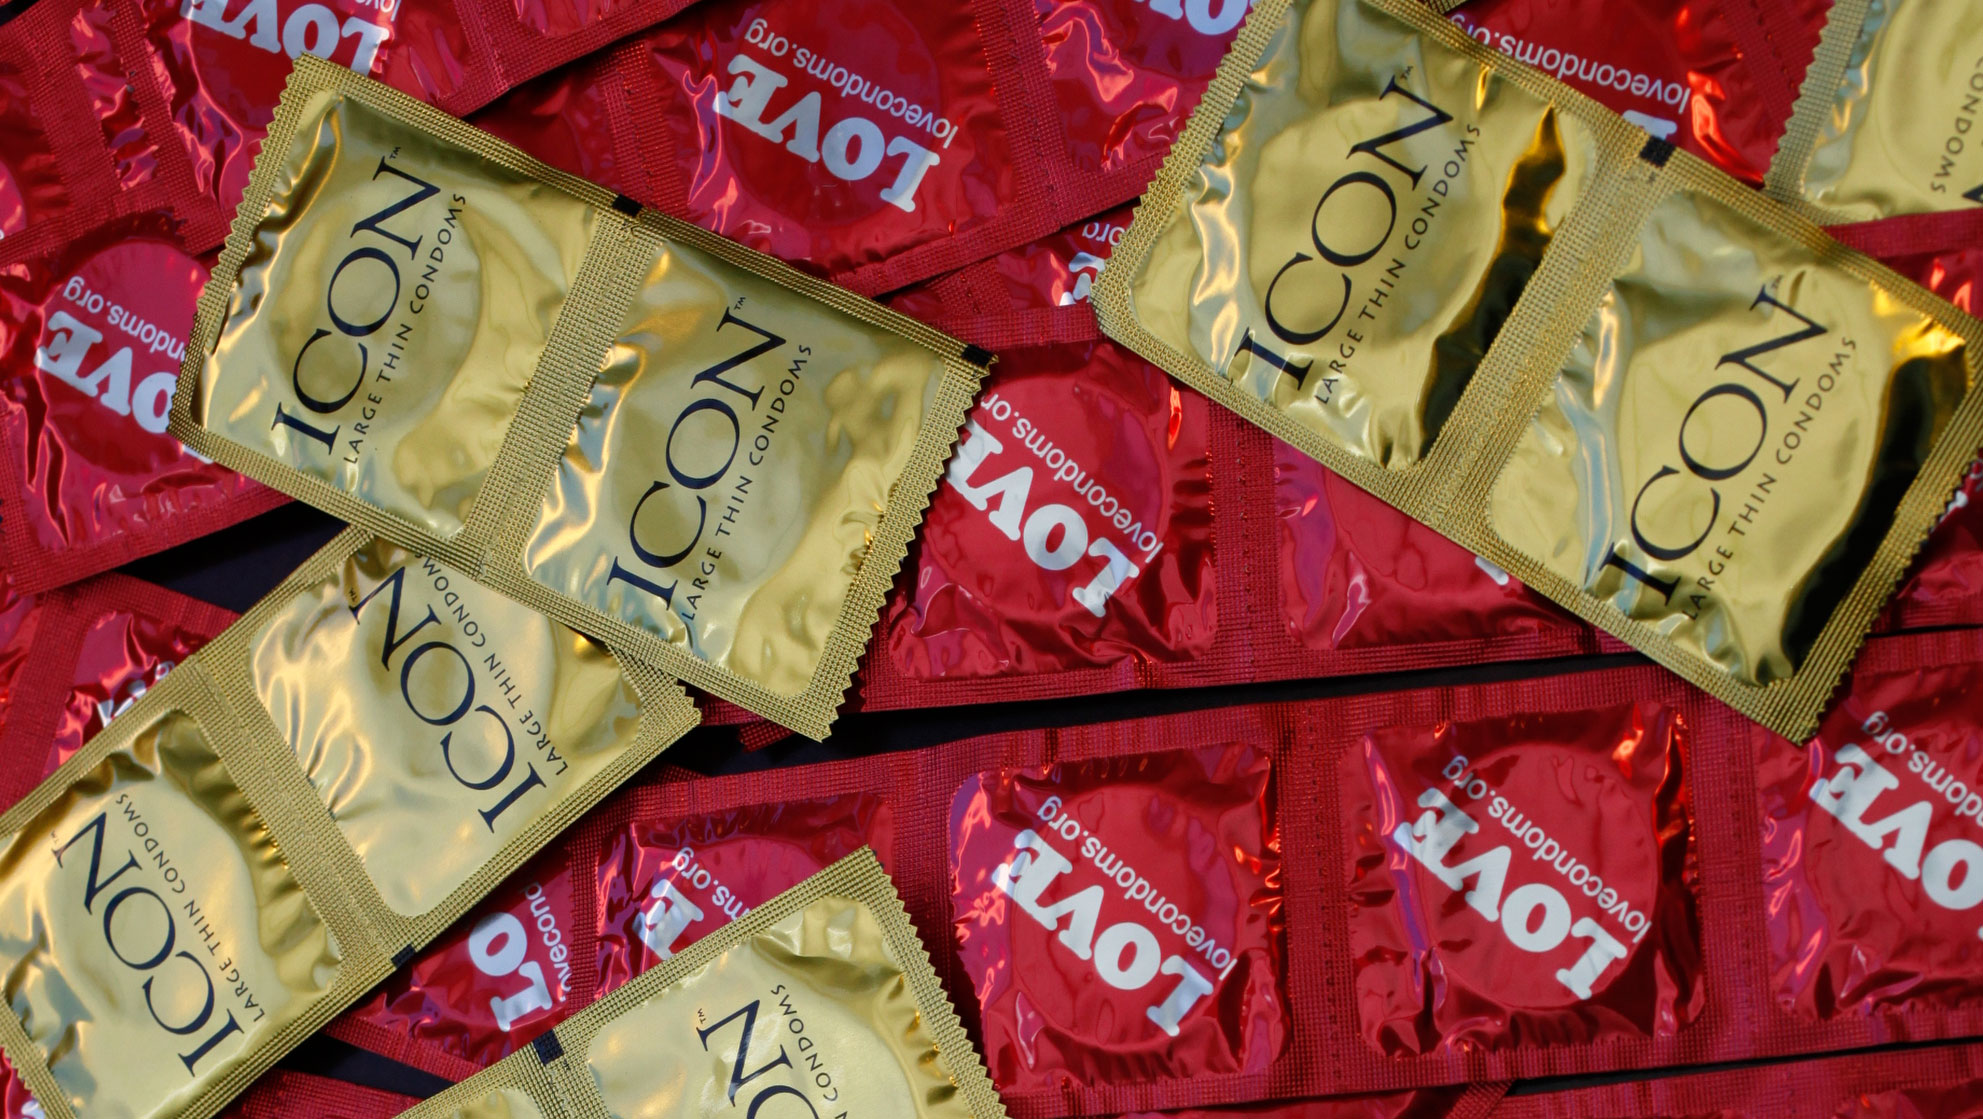 Condames - Californians to vote on requiring condoms in porn films - CBS News